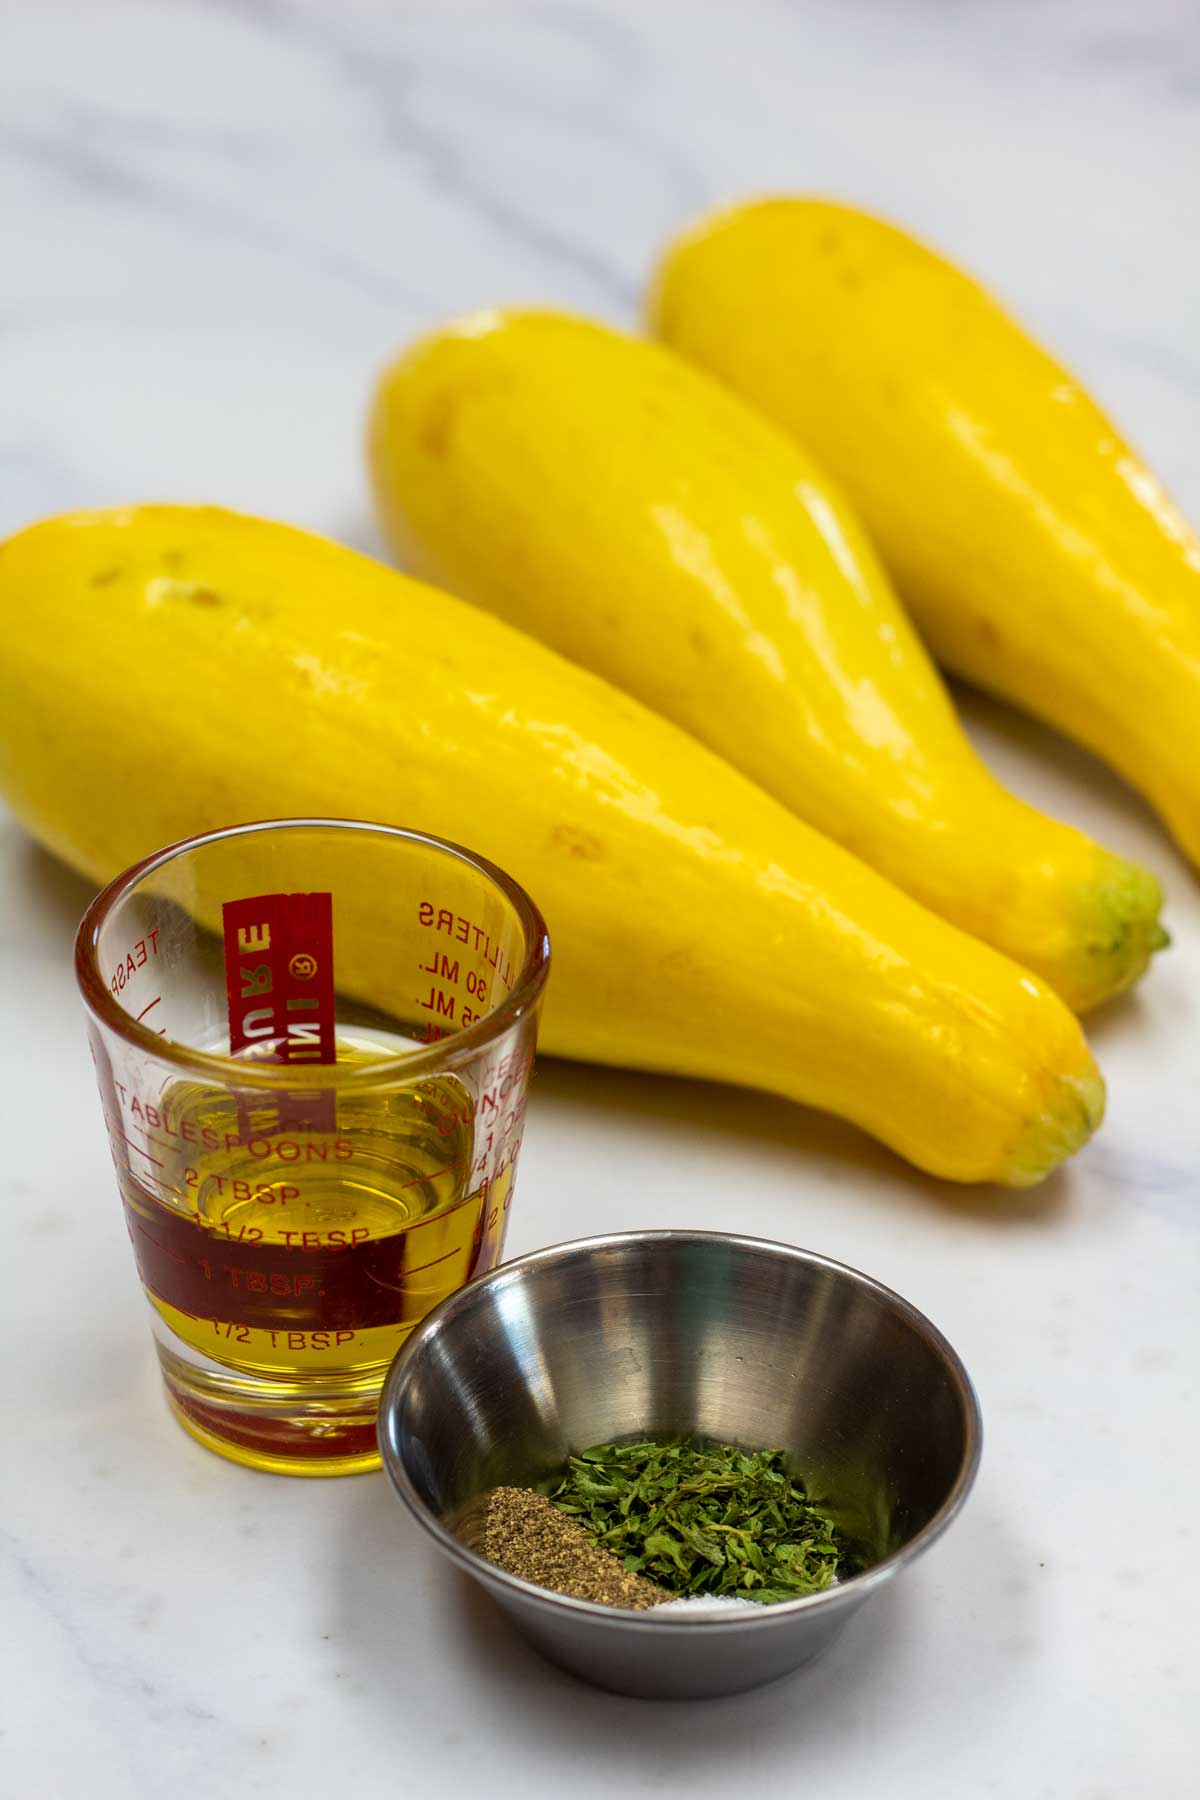 Tall image showing ingredients for sauteed yellow squash.